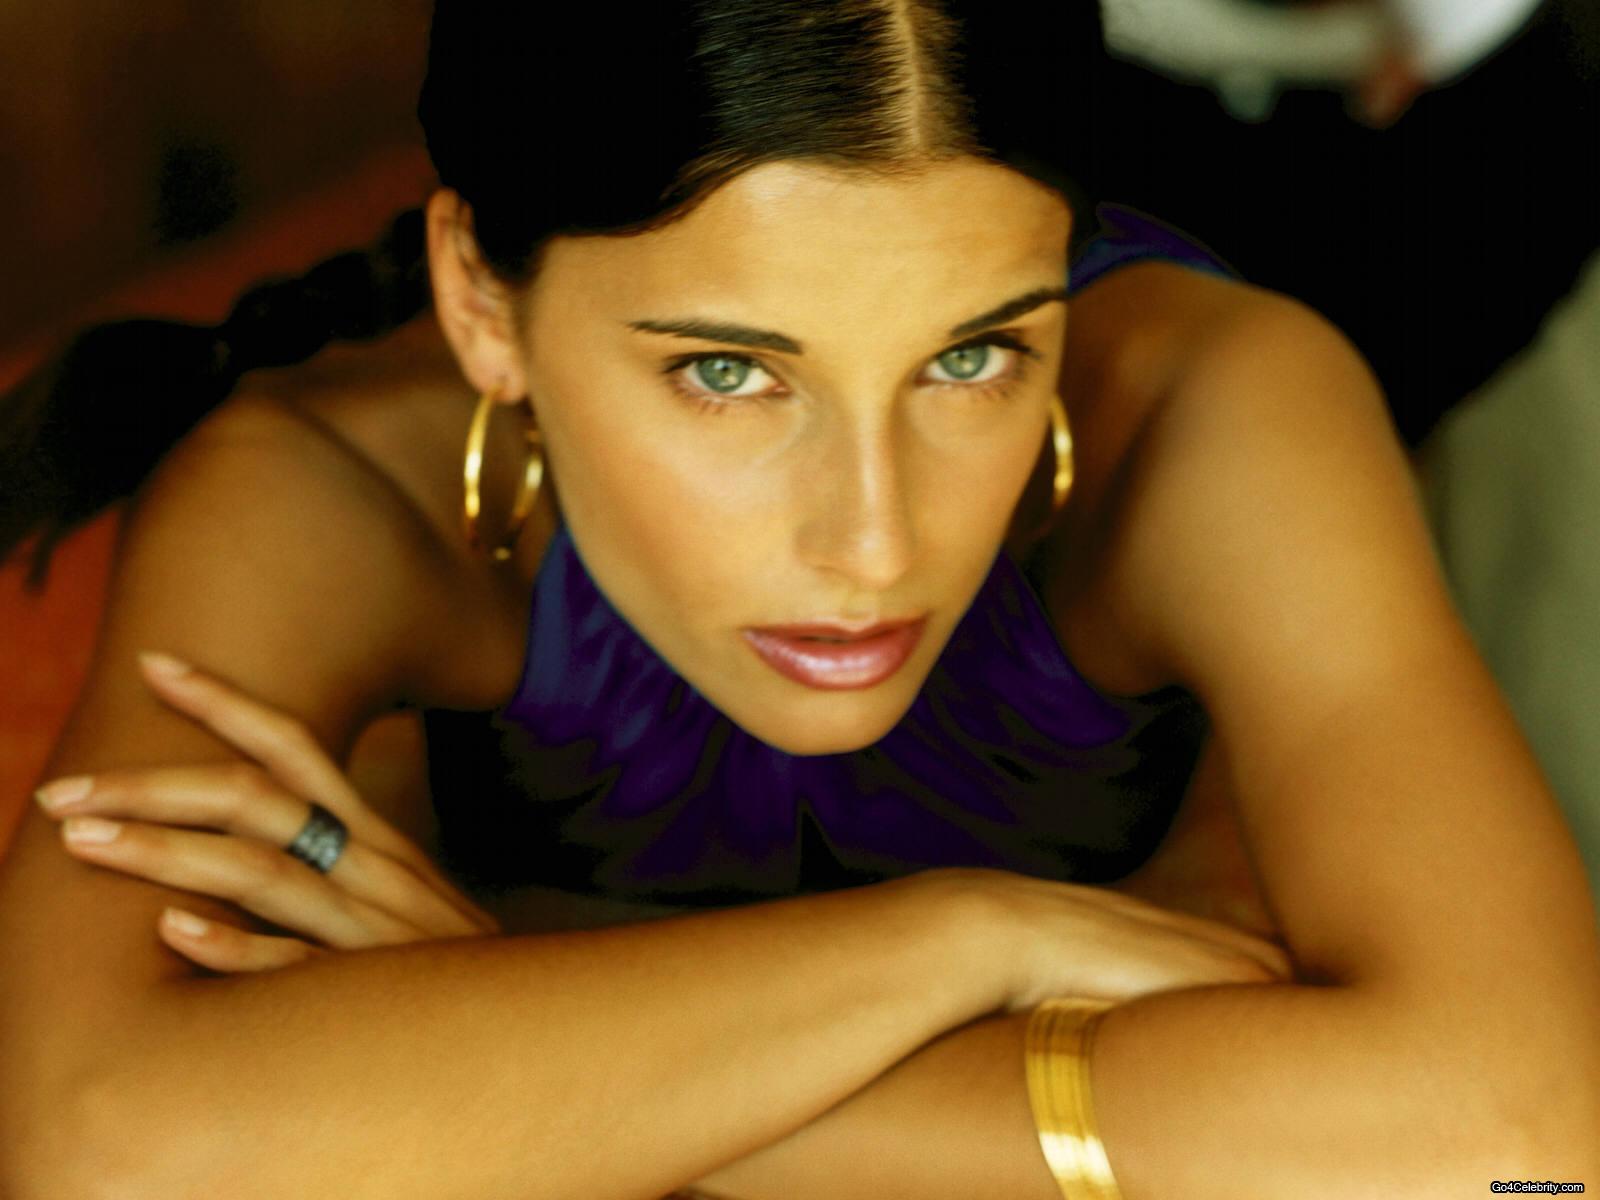 Nelly Furtado Awesome And Fabulous Image HD Wallpaper Photos